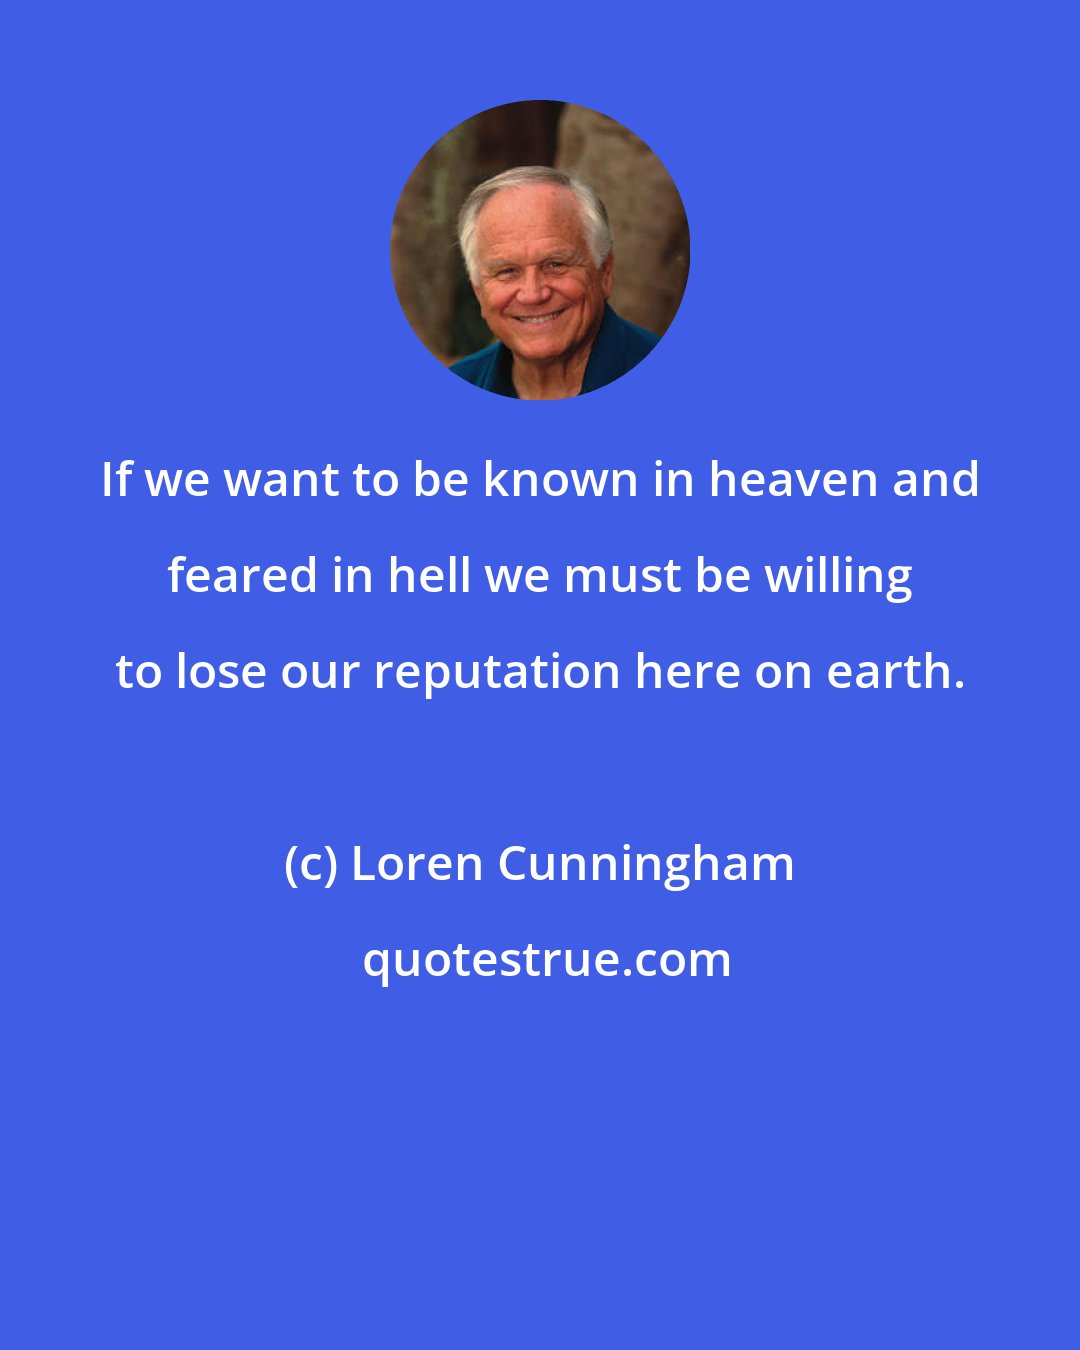 Loren Cunningham: If we want to be known in heaven and feared in hell we must be willing to lose our reputation here on earth.